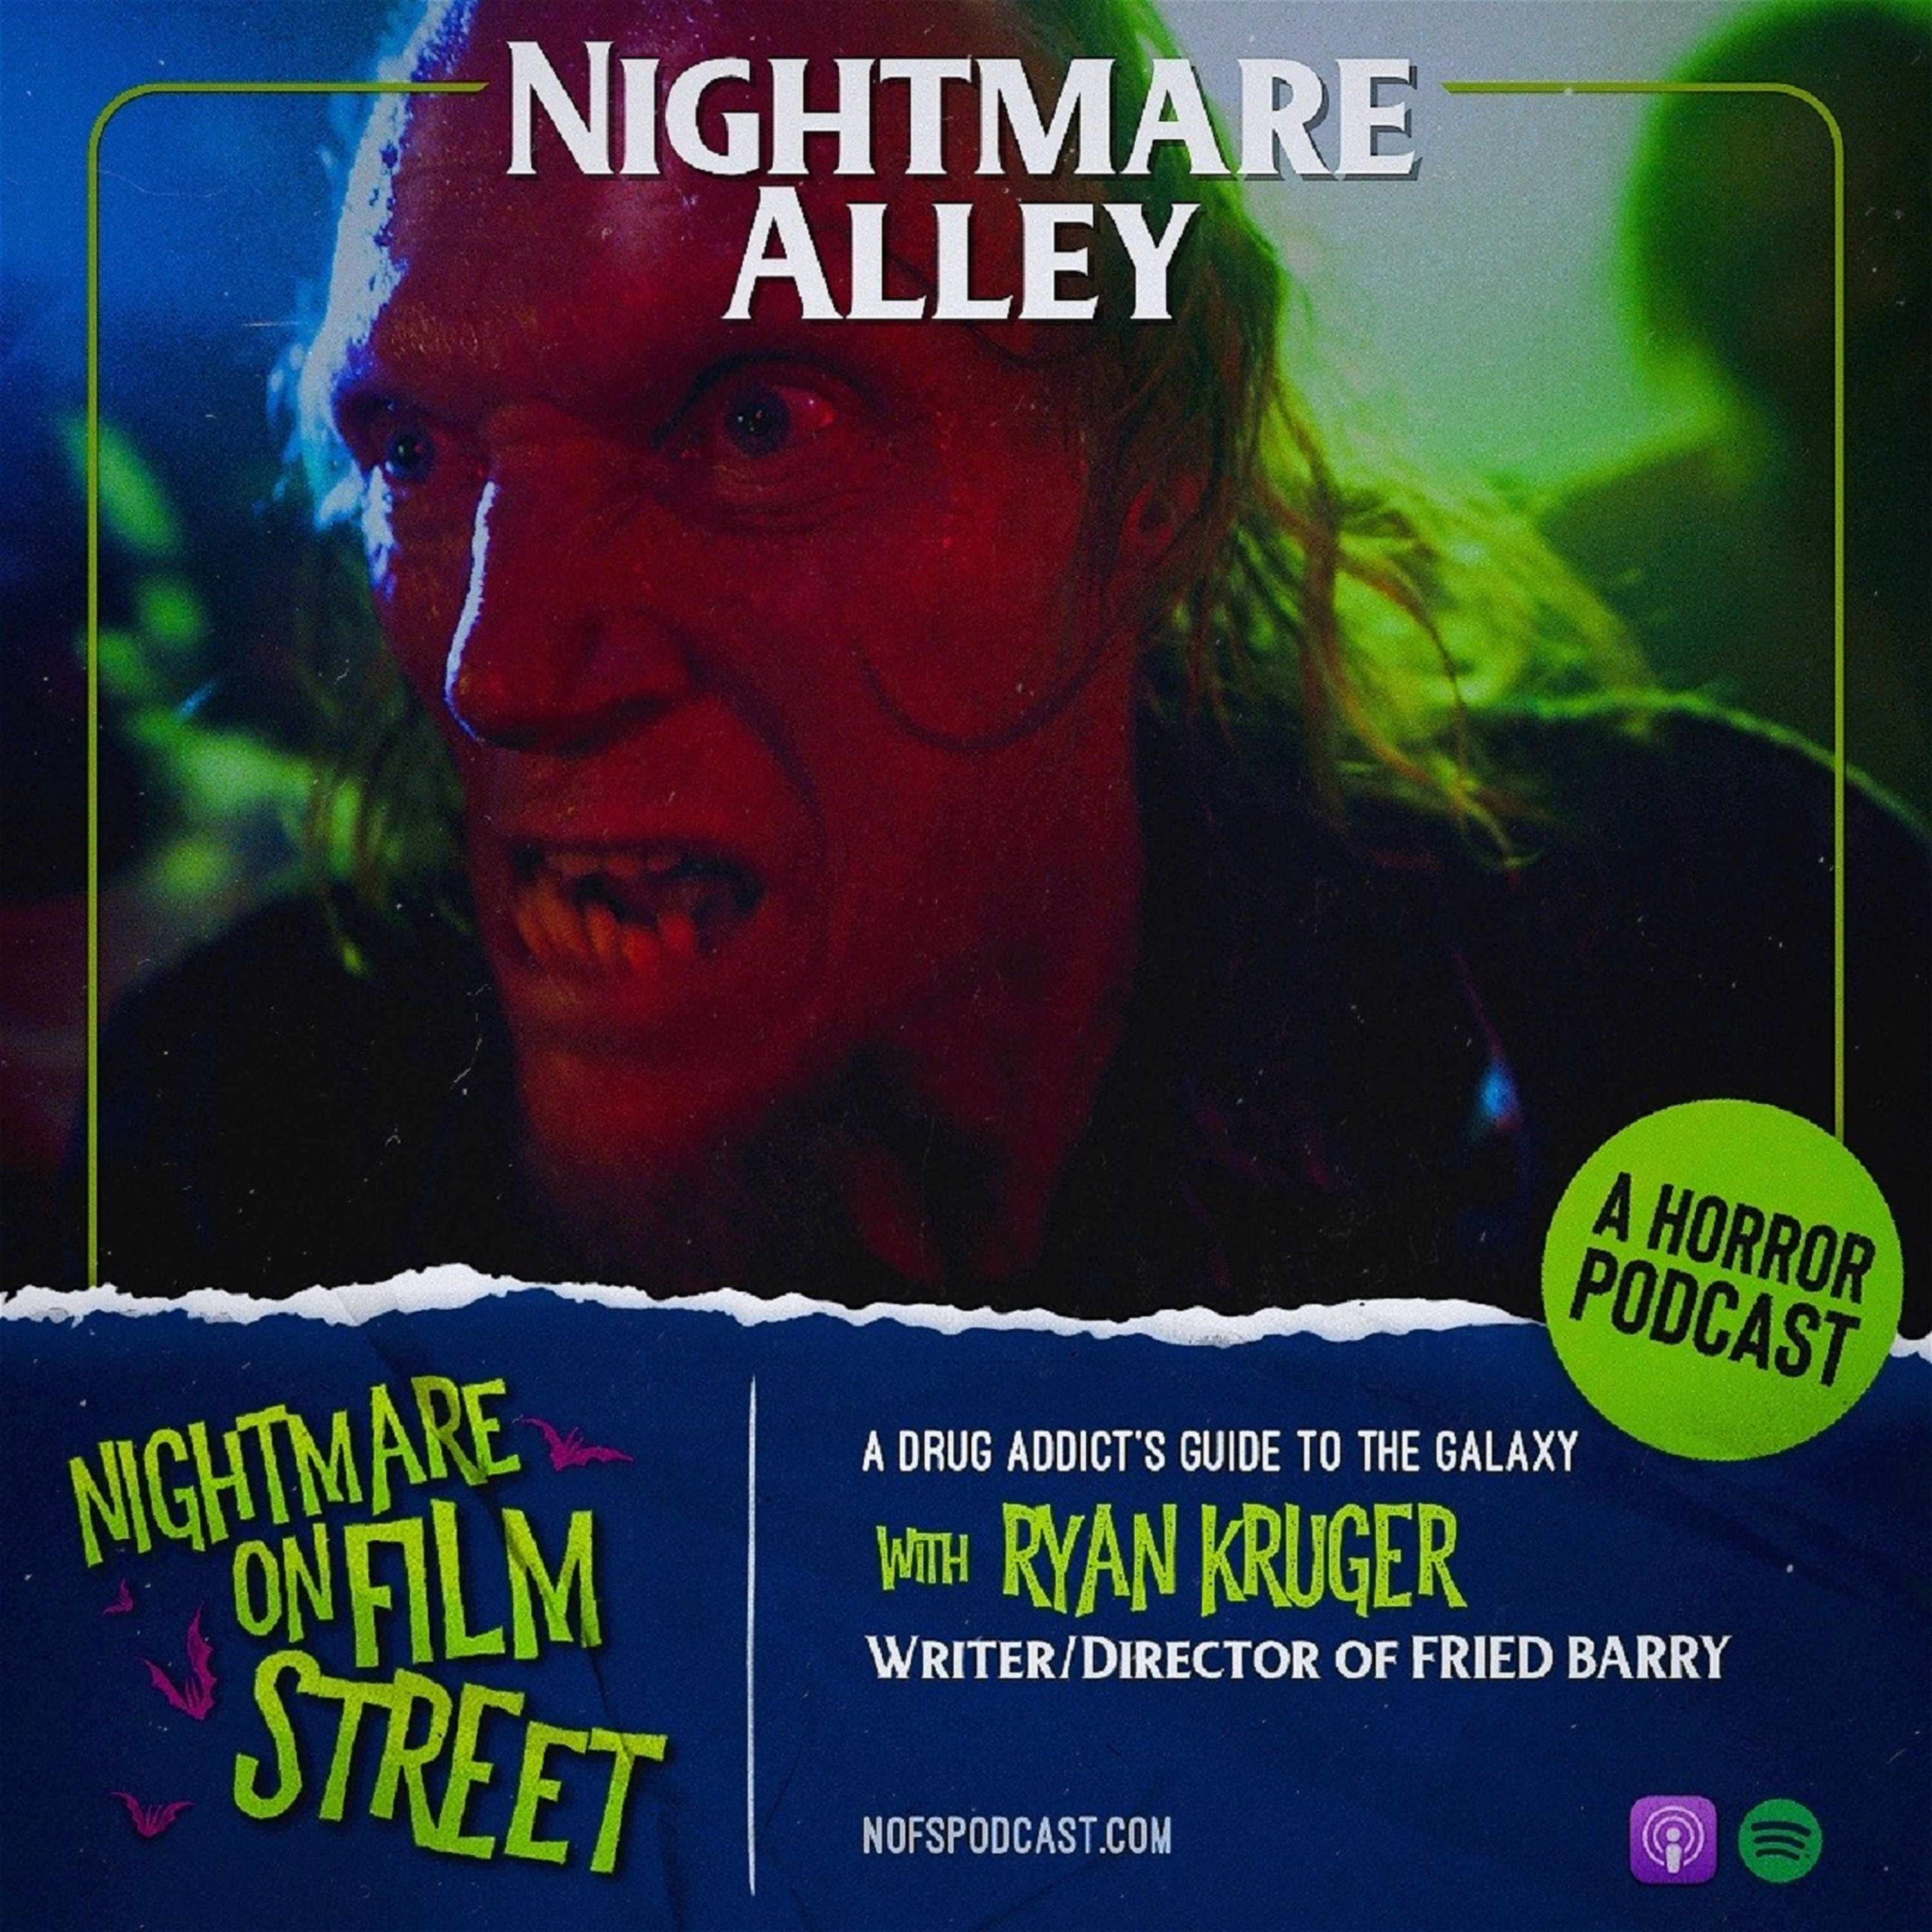 Nightmare Alley: FRIED BARRY Interview with Writer/Director Ryan Kruger